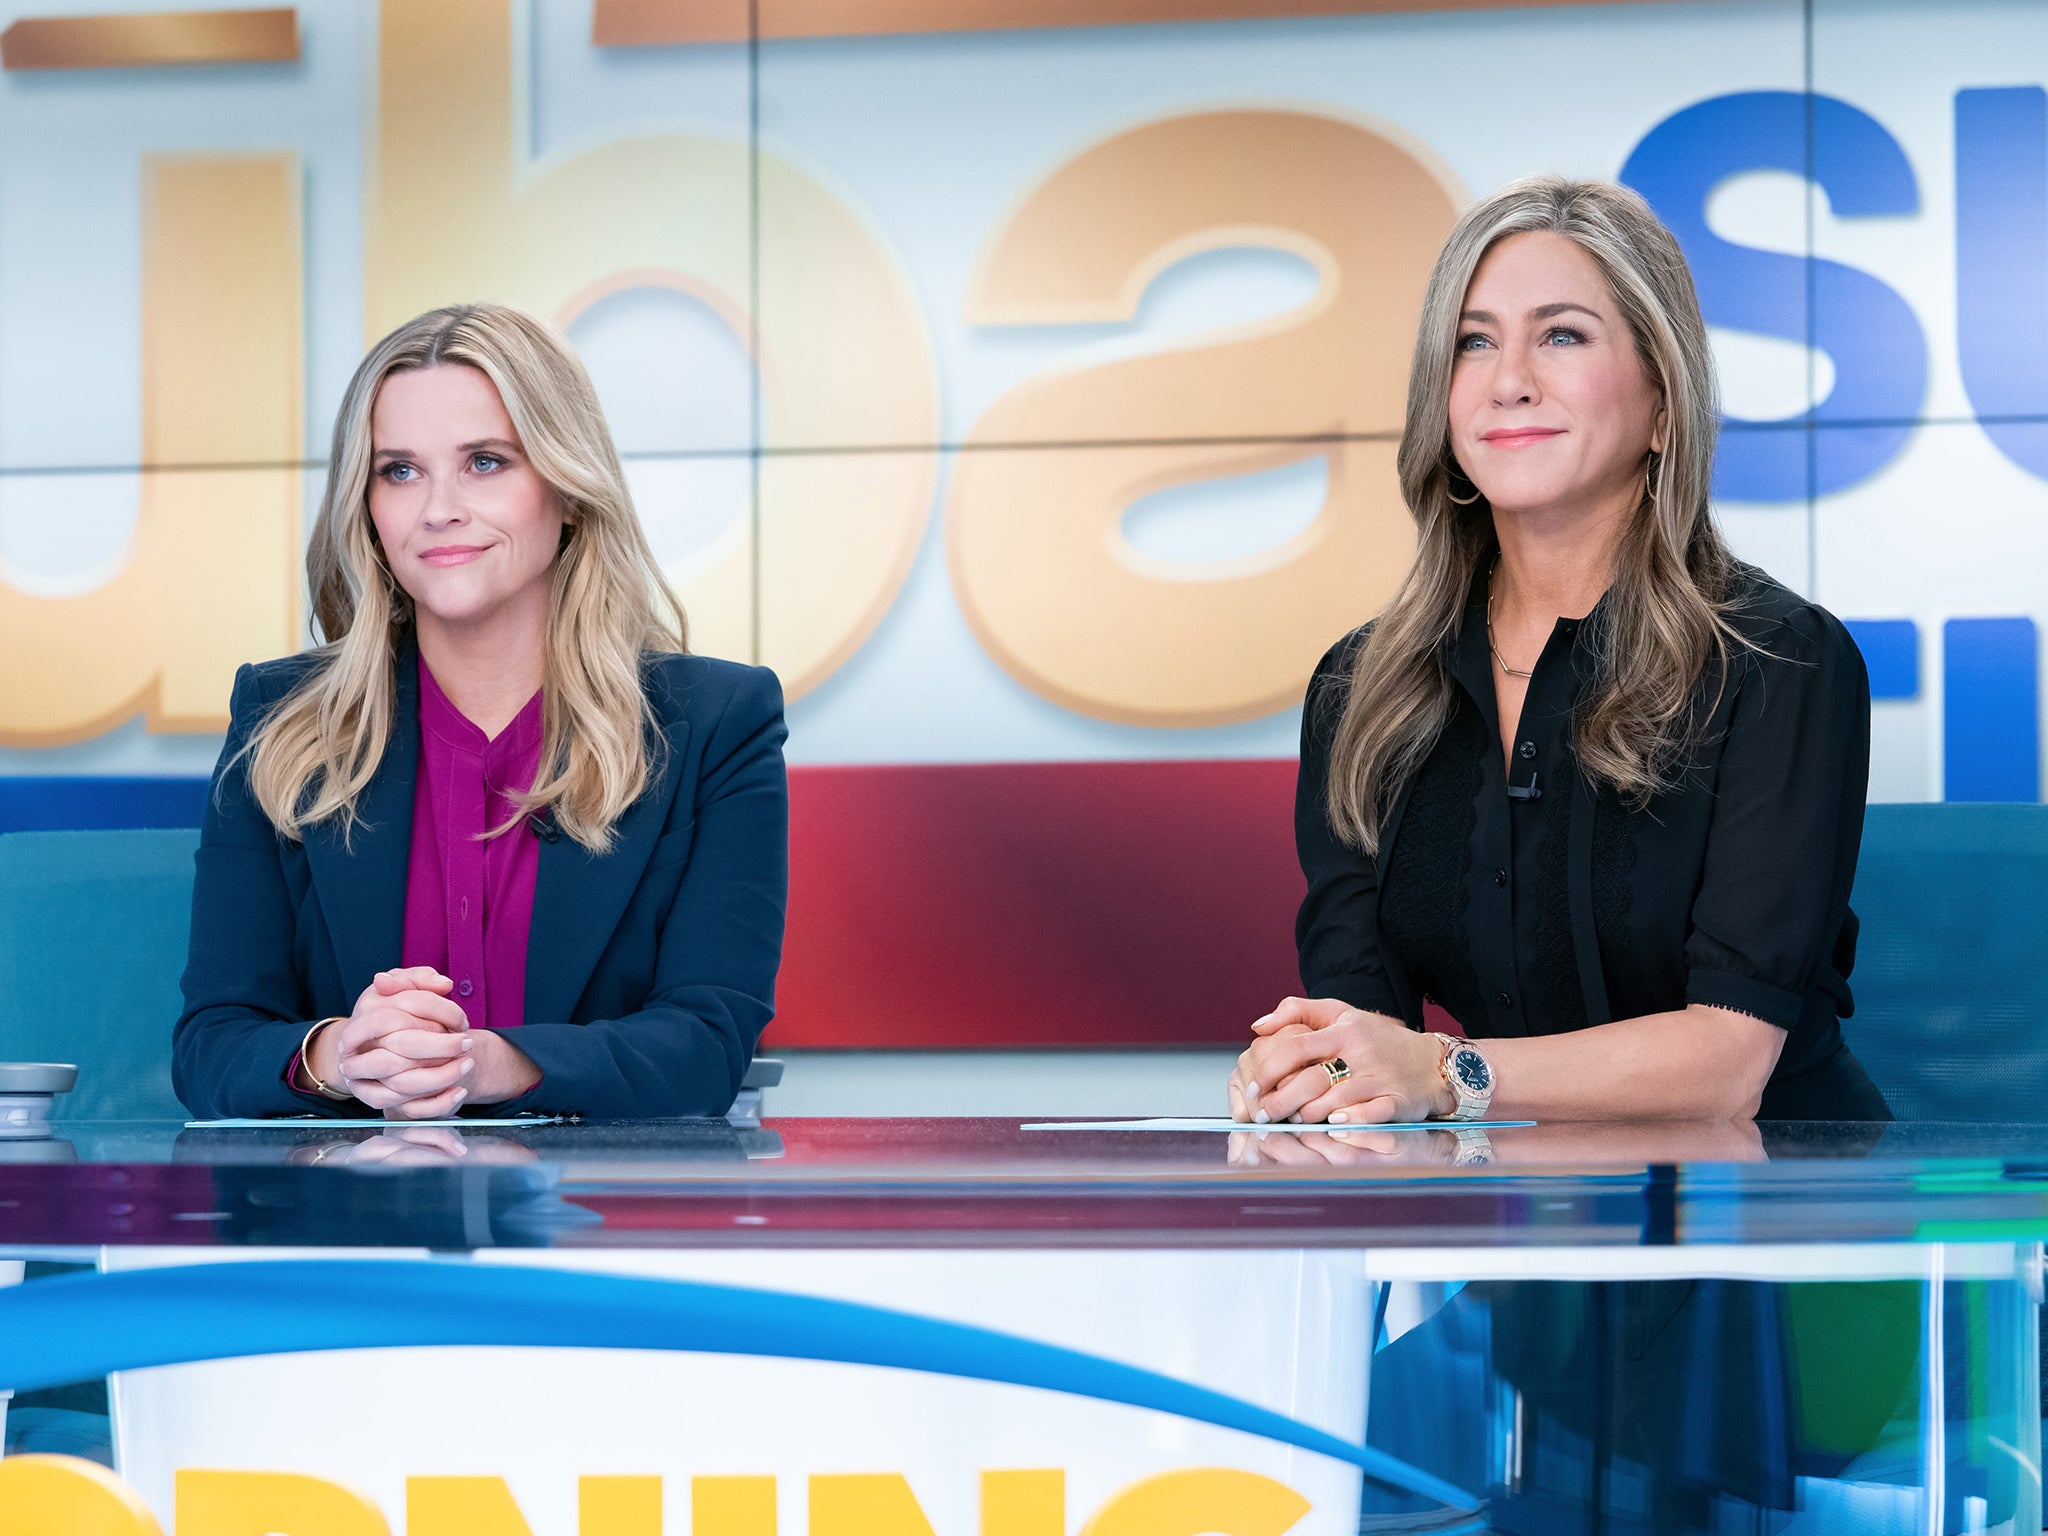 Reese Witherspoon and Jennifer Aniston in ‘The Morning Show’